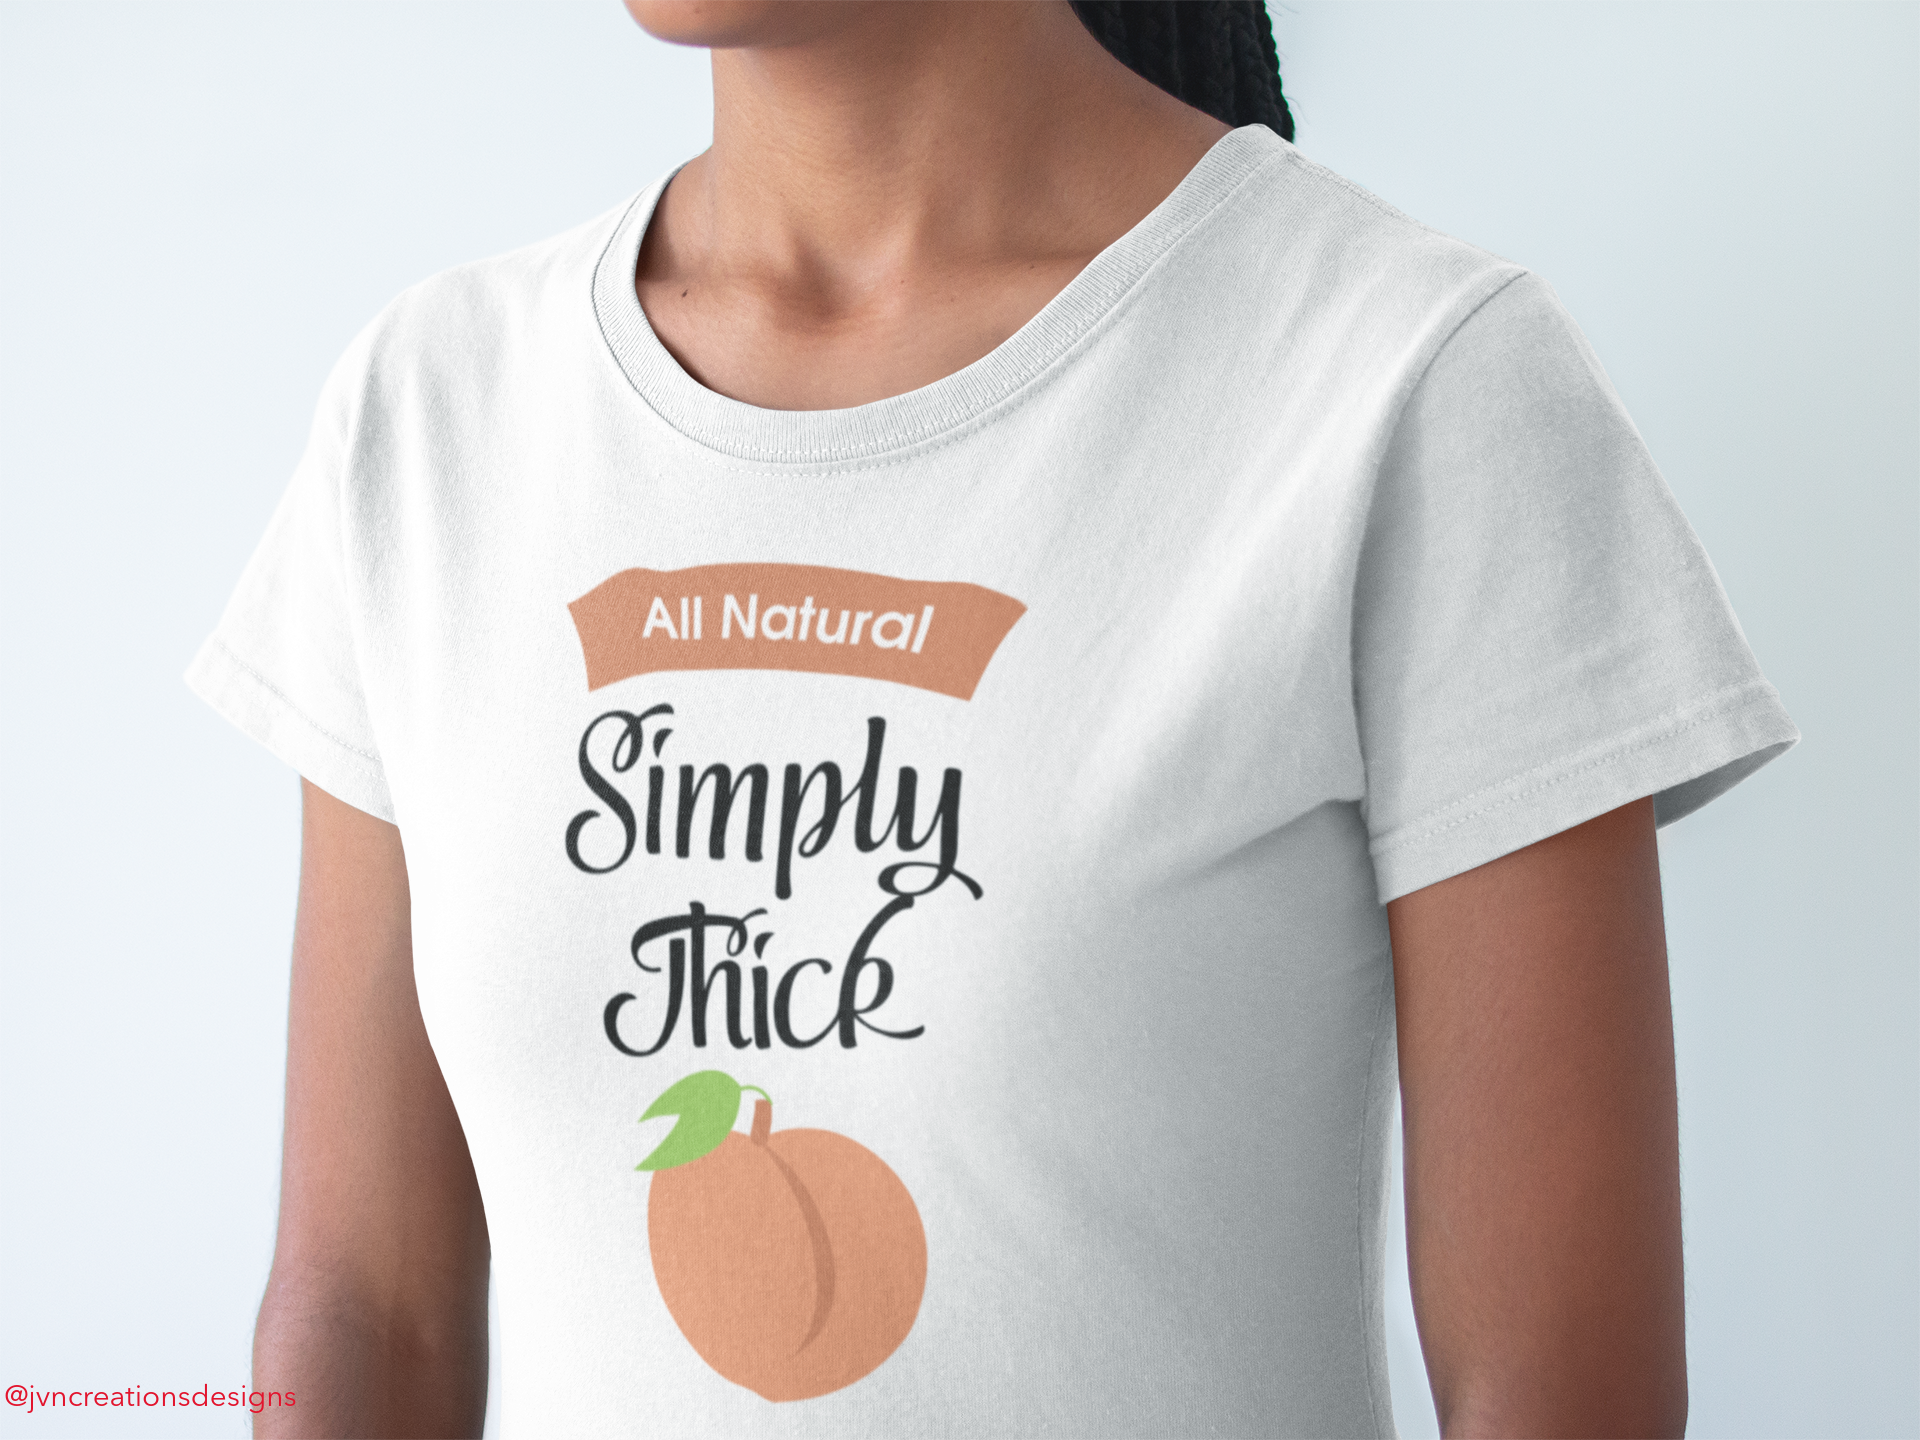 Simply Thick - JVN Creations & Designs